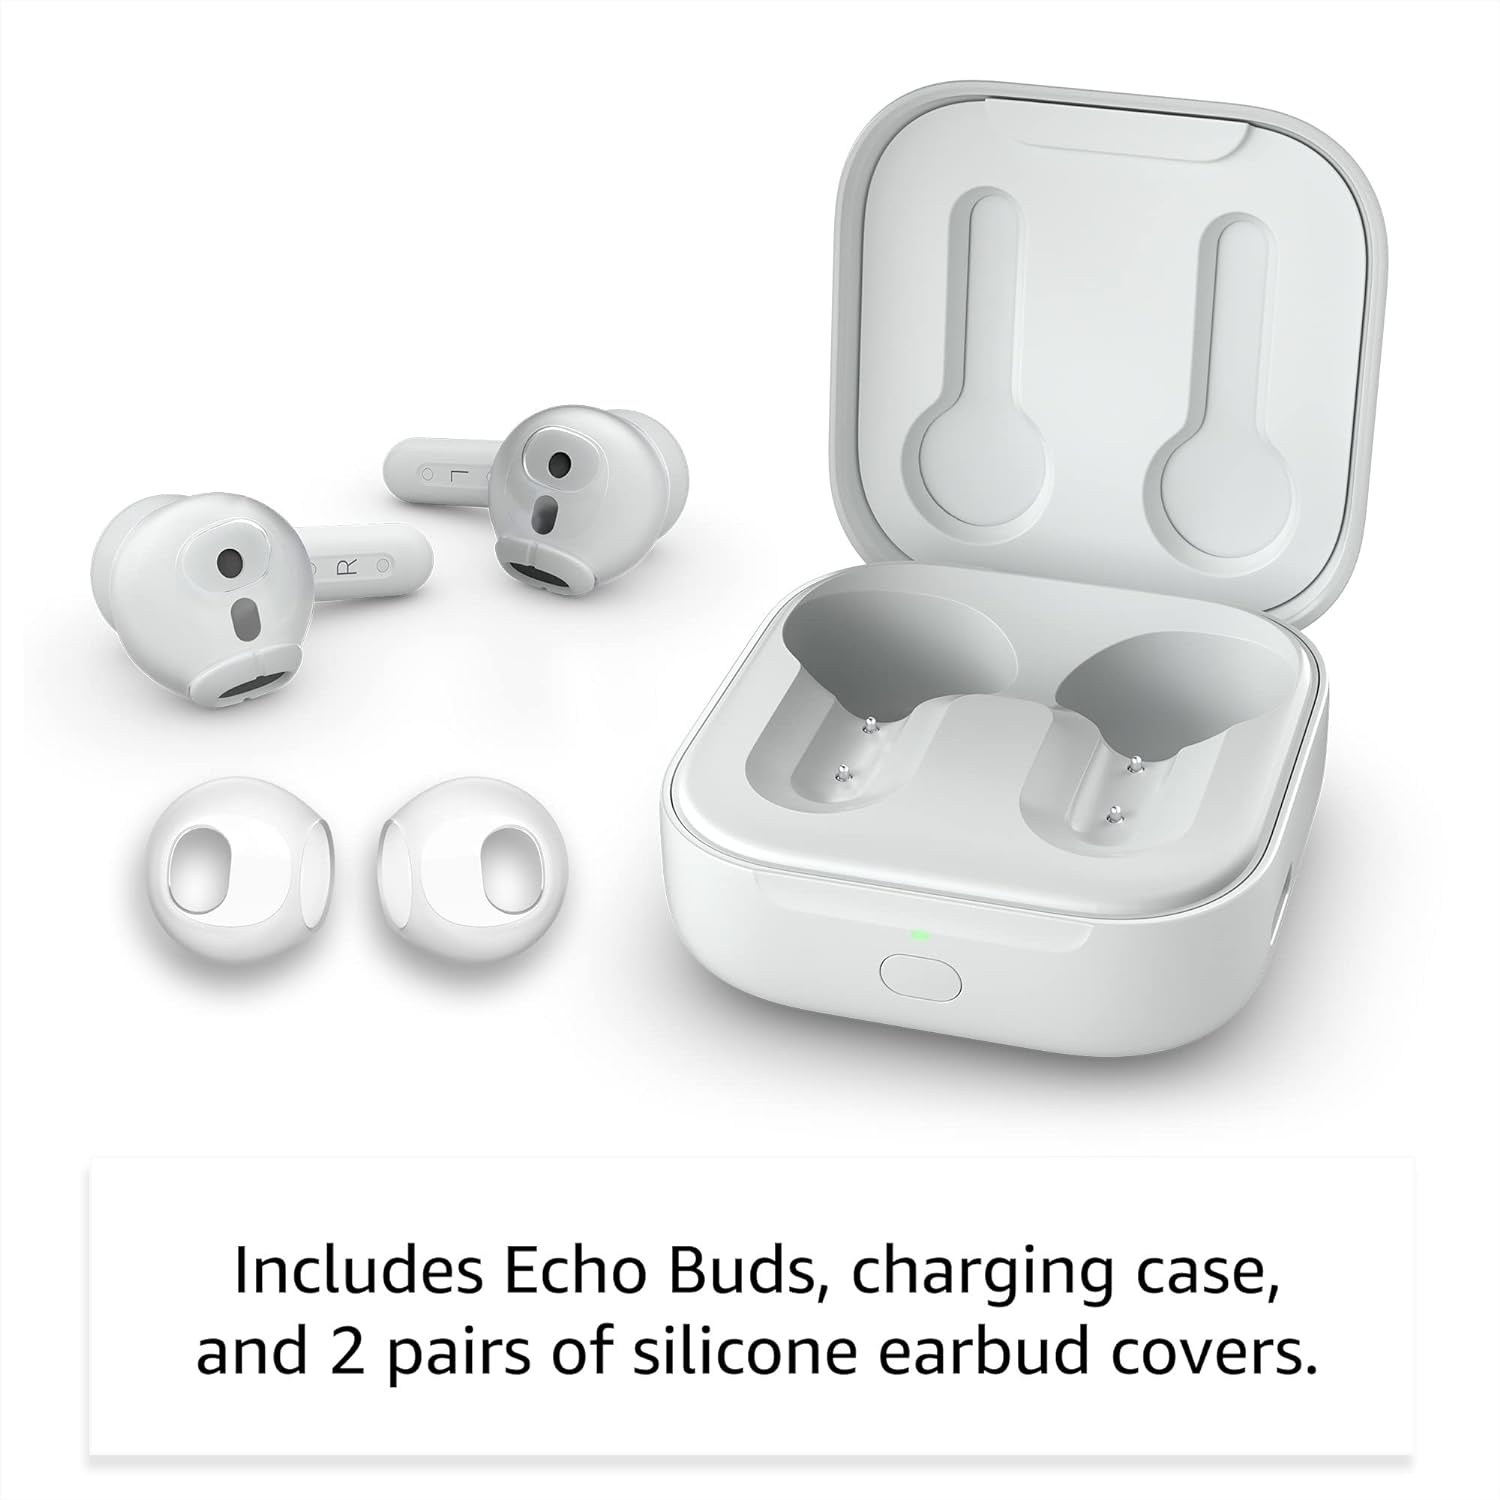 All-new Echo Buds (2023 Release) | Semi-in-ear, True Wireless Bluetooth 5.2 Earbuds with Alexa, multipoint, 20H battery with charging case, fast charging, sweat resistant | Glacier White